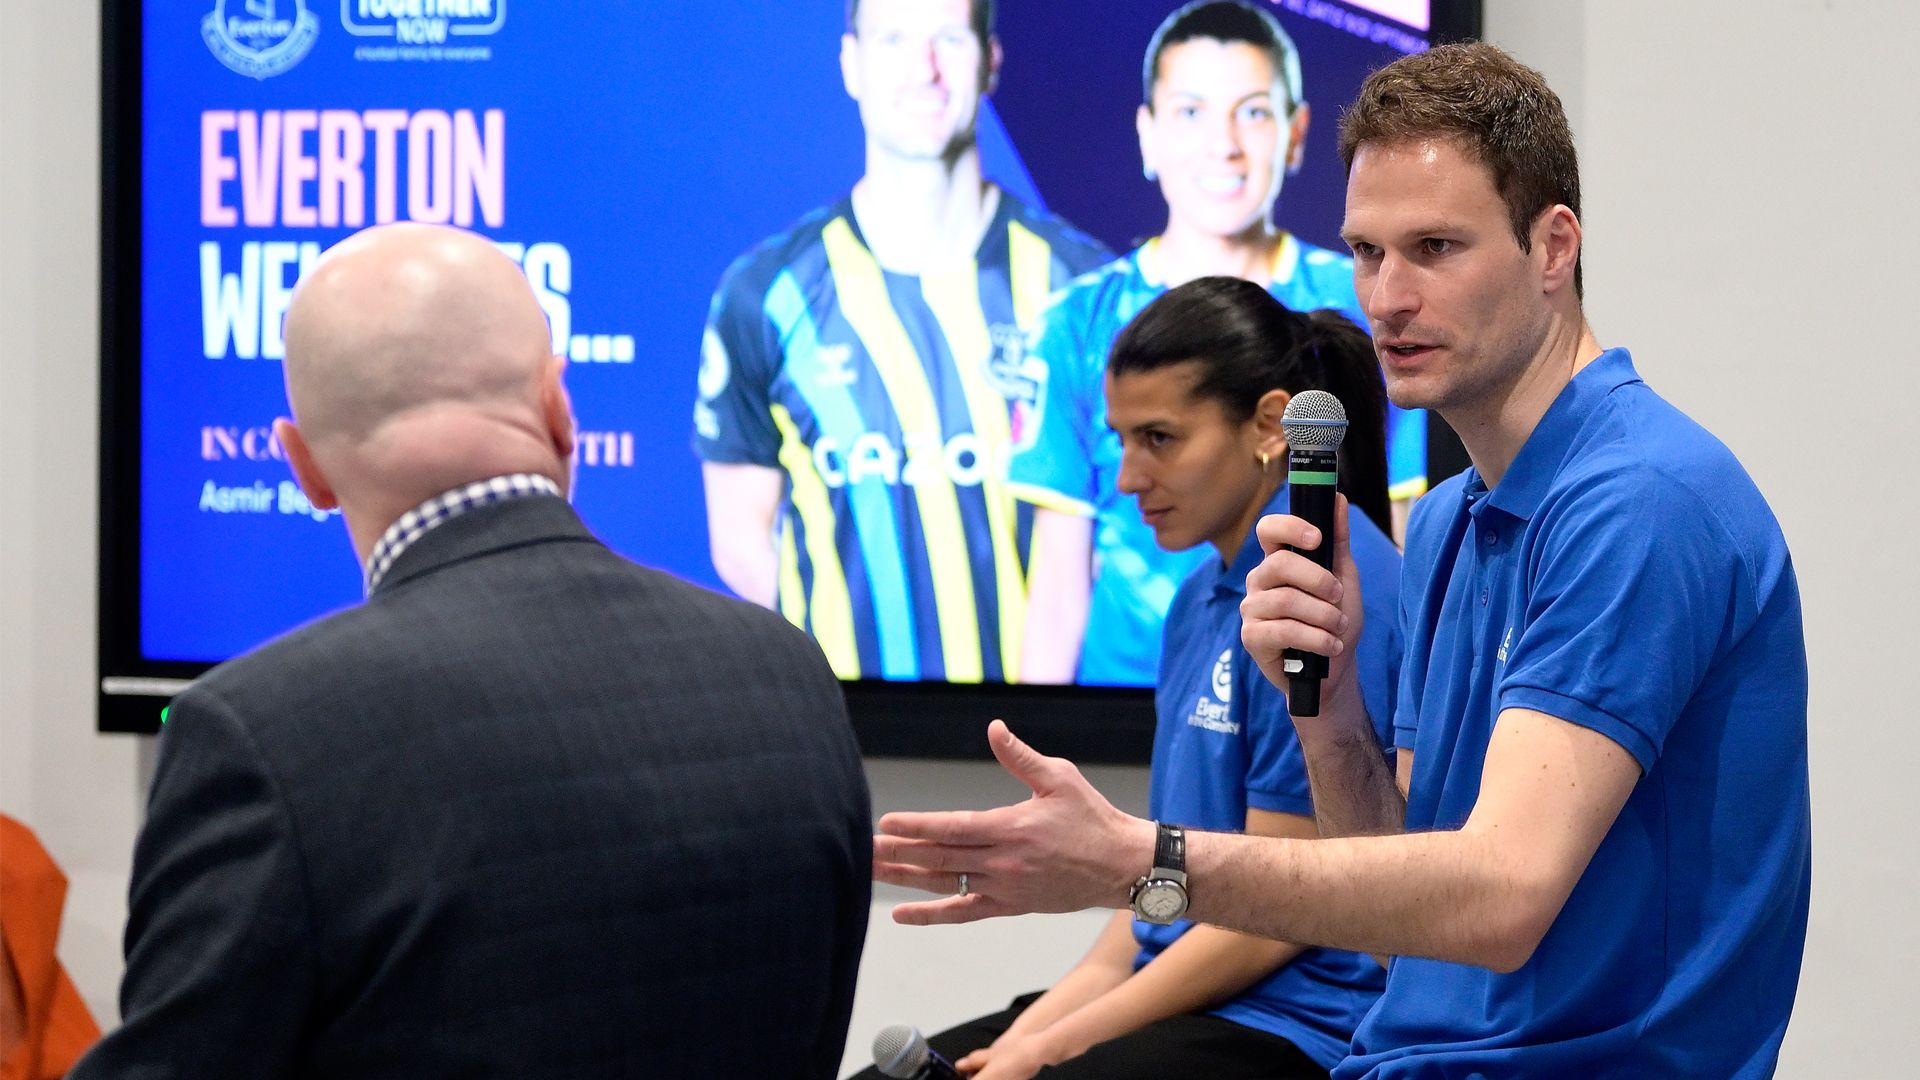 Begovic And Dali Inspire At Everton Welcomes Event